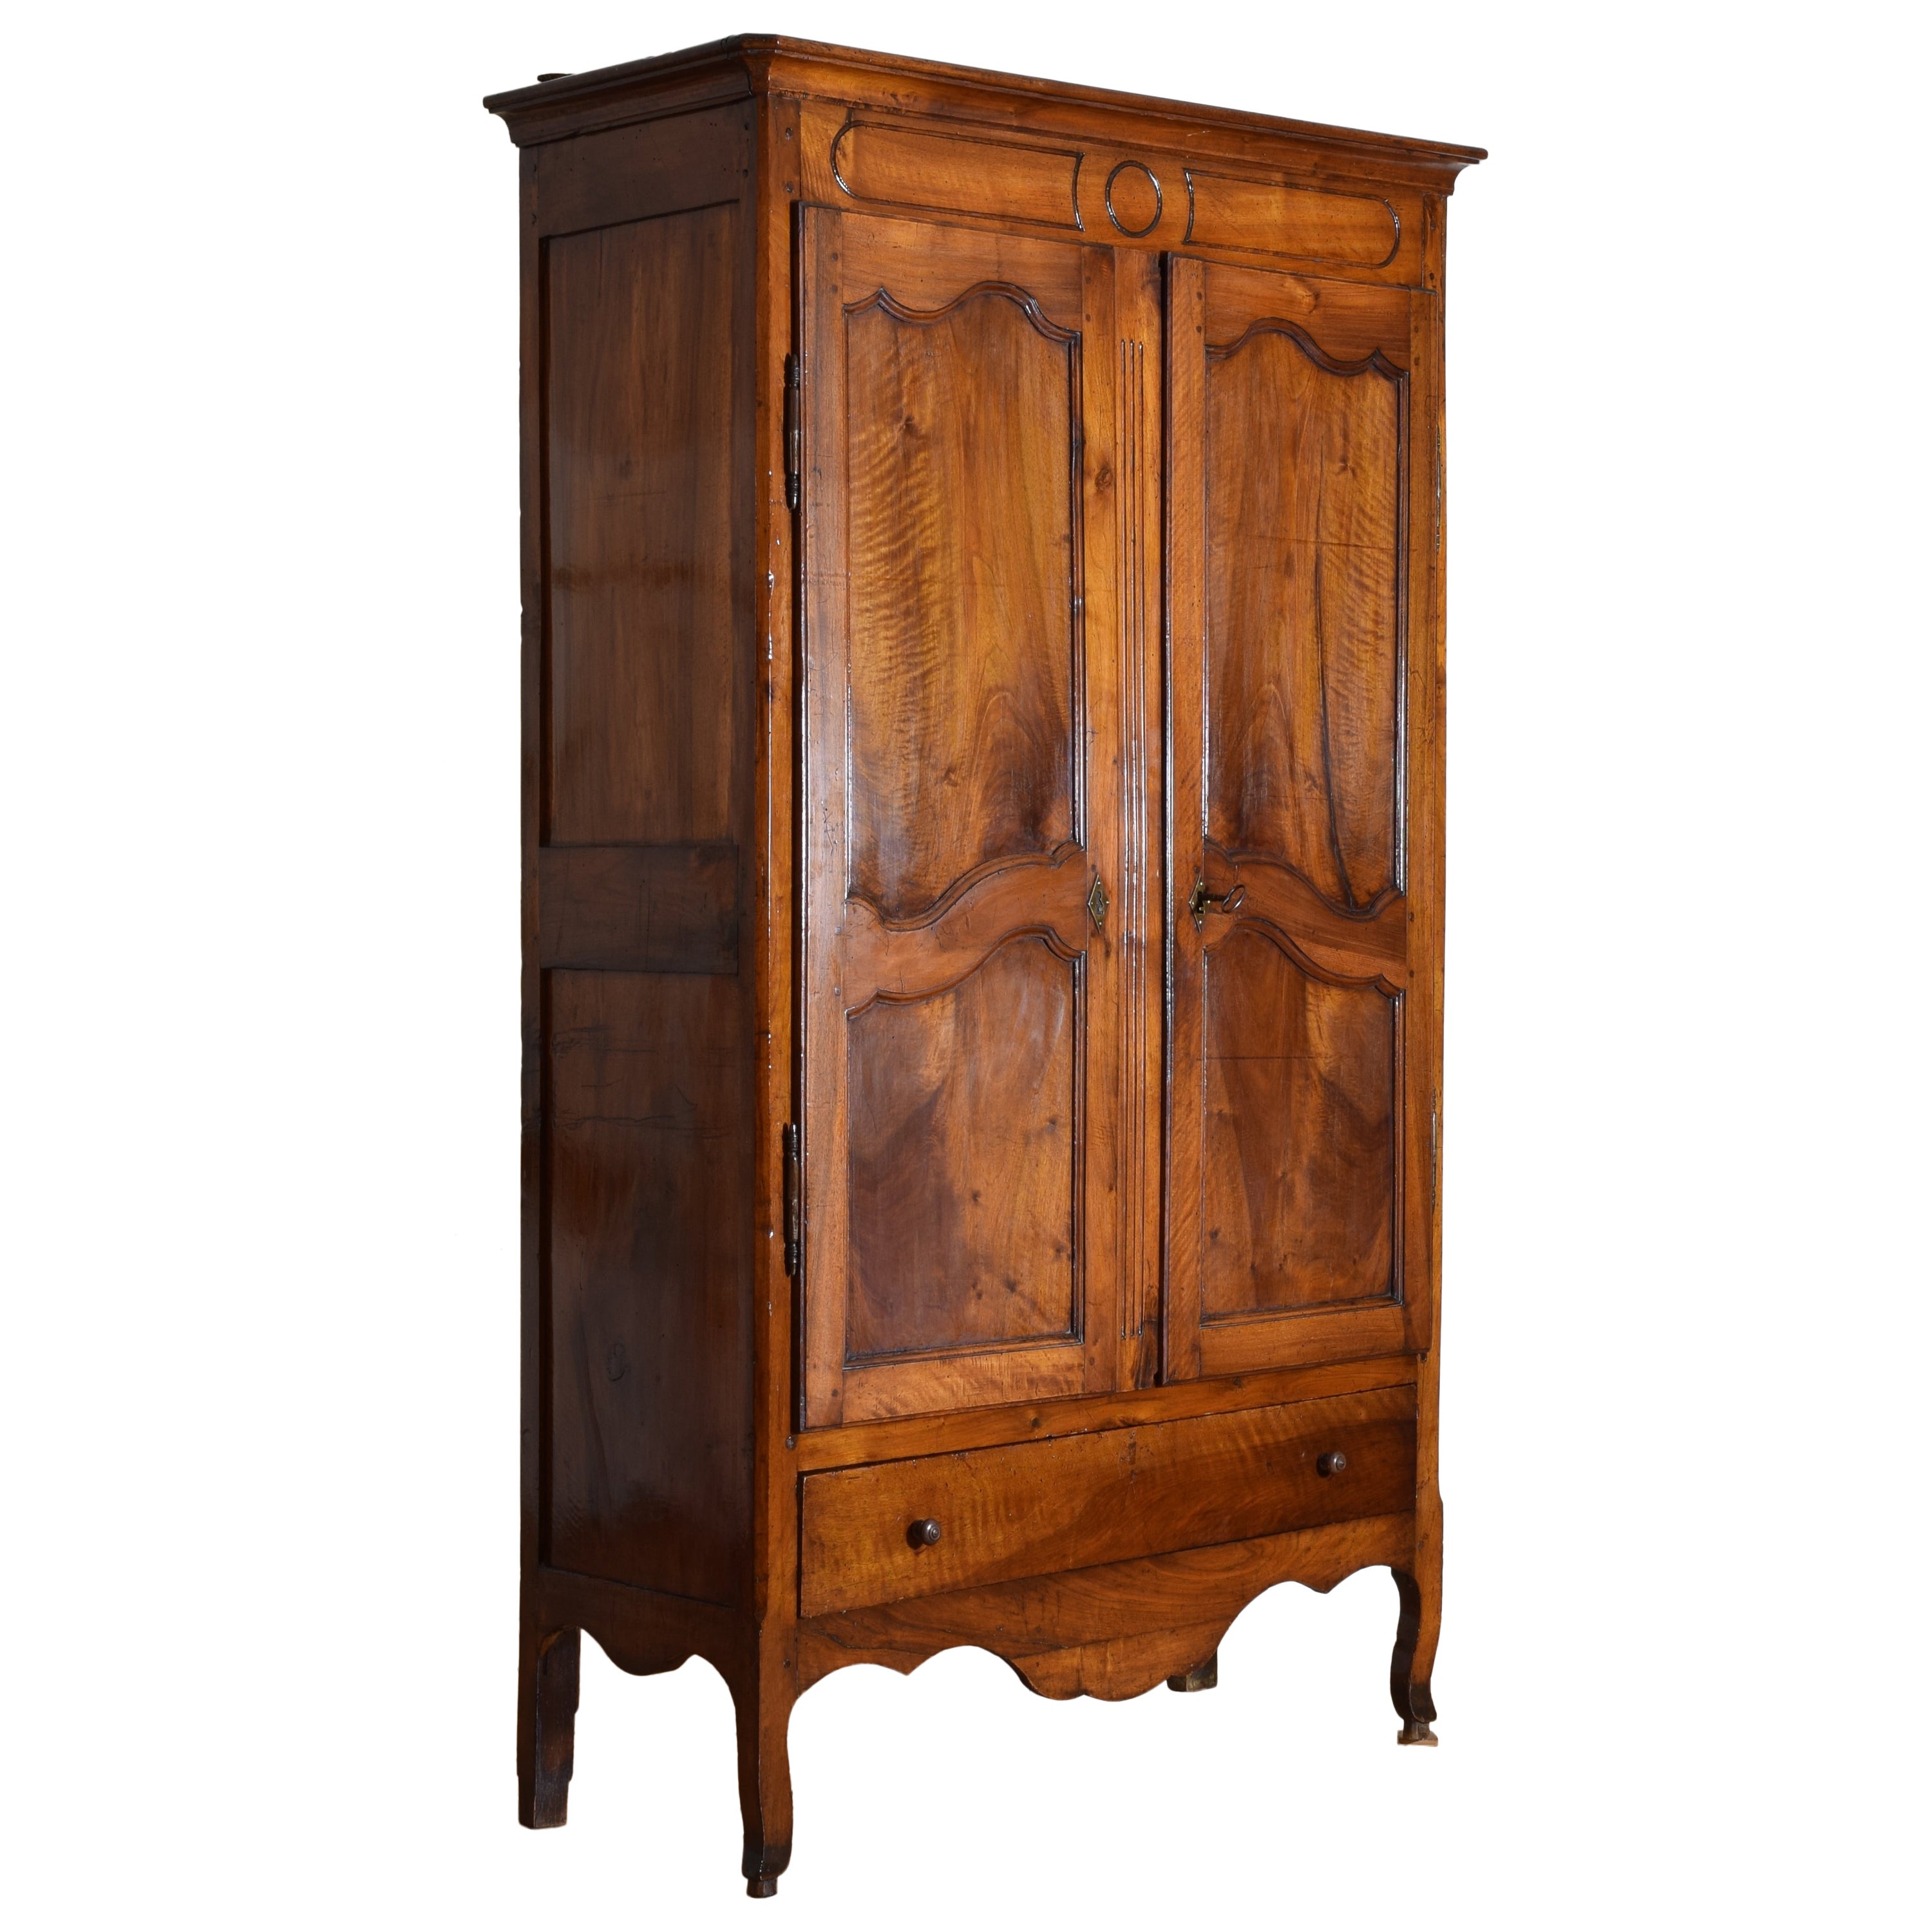 French Louis XV Period Walnut 2-Door Armoire of 3/4 size, mid 18th cen.